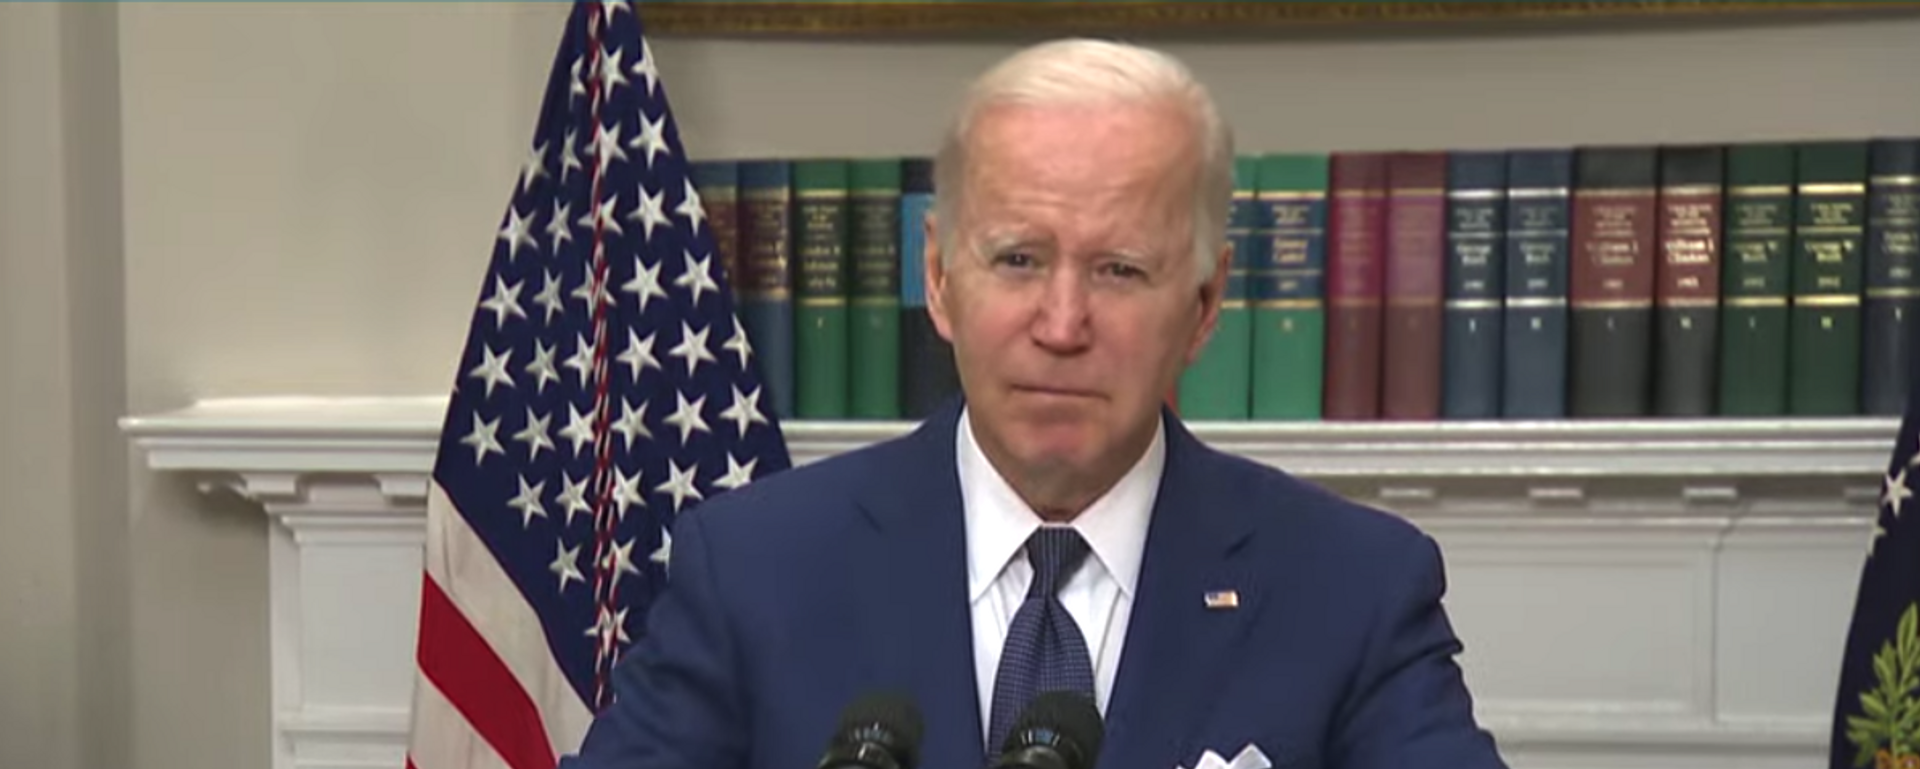 US President Joe Biden addresses the nation on May 24, 2022, after news that at least 18 children and one teacher was killed during a mass shooting at Robb Elementary School in Uvalde, Texas. - Sputnik International, 1920, 25.05.2022